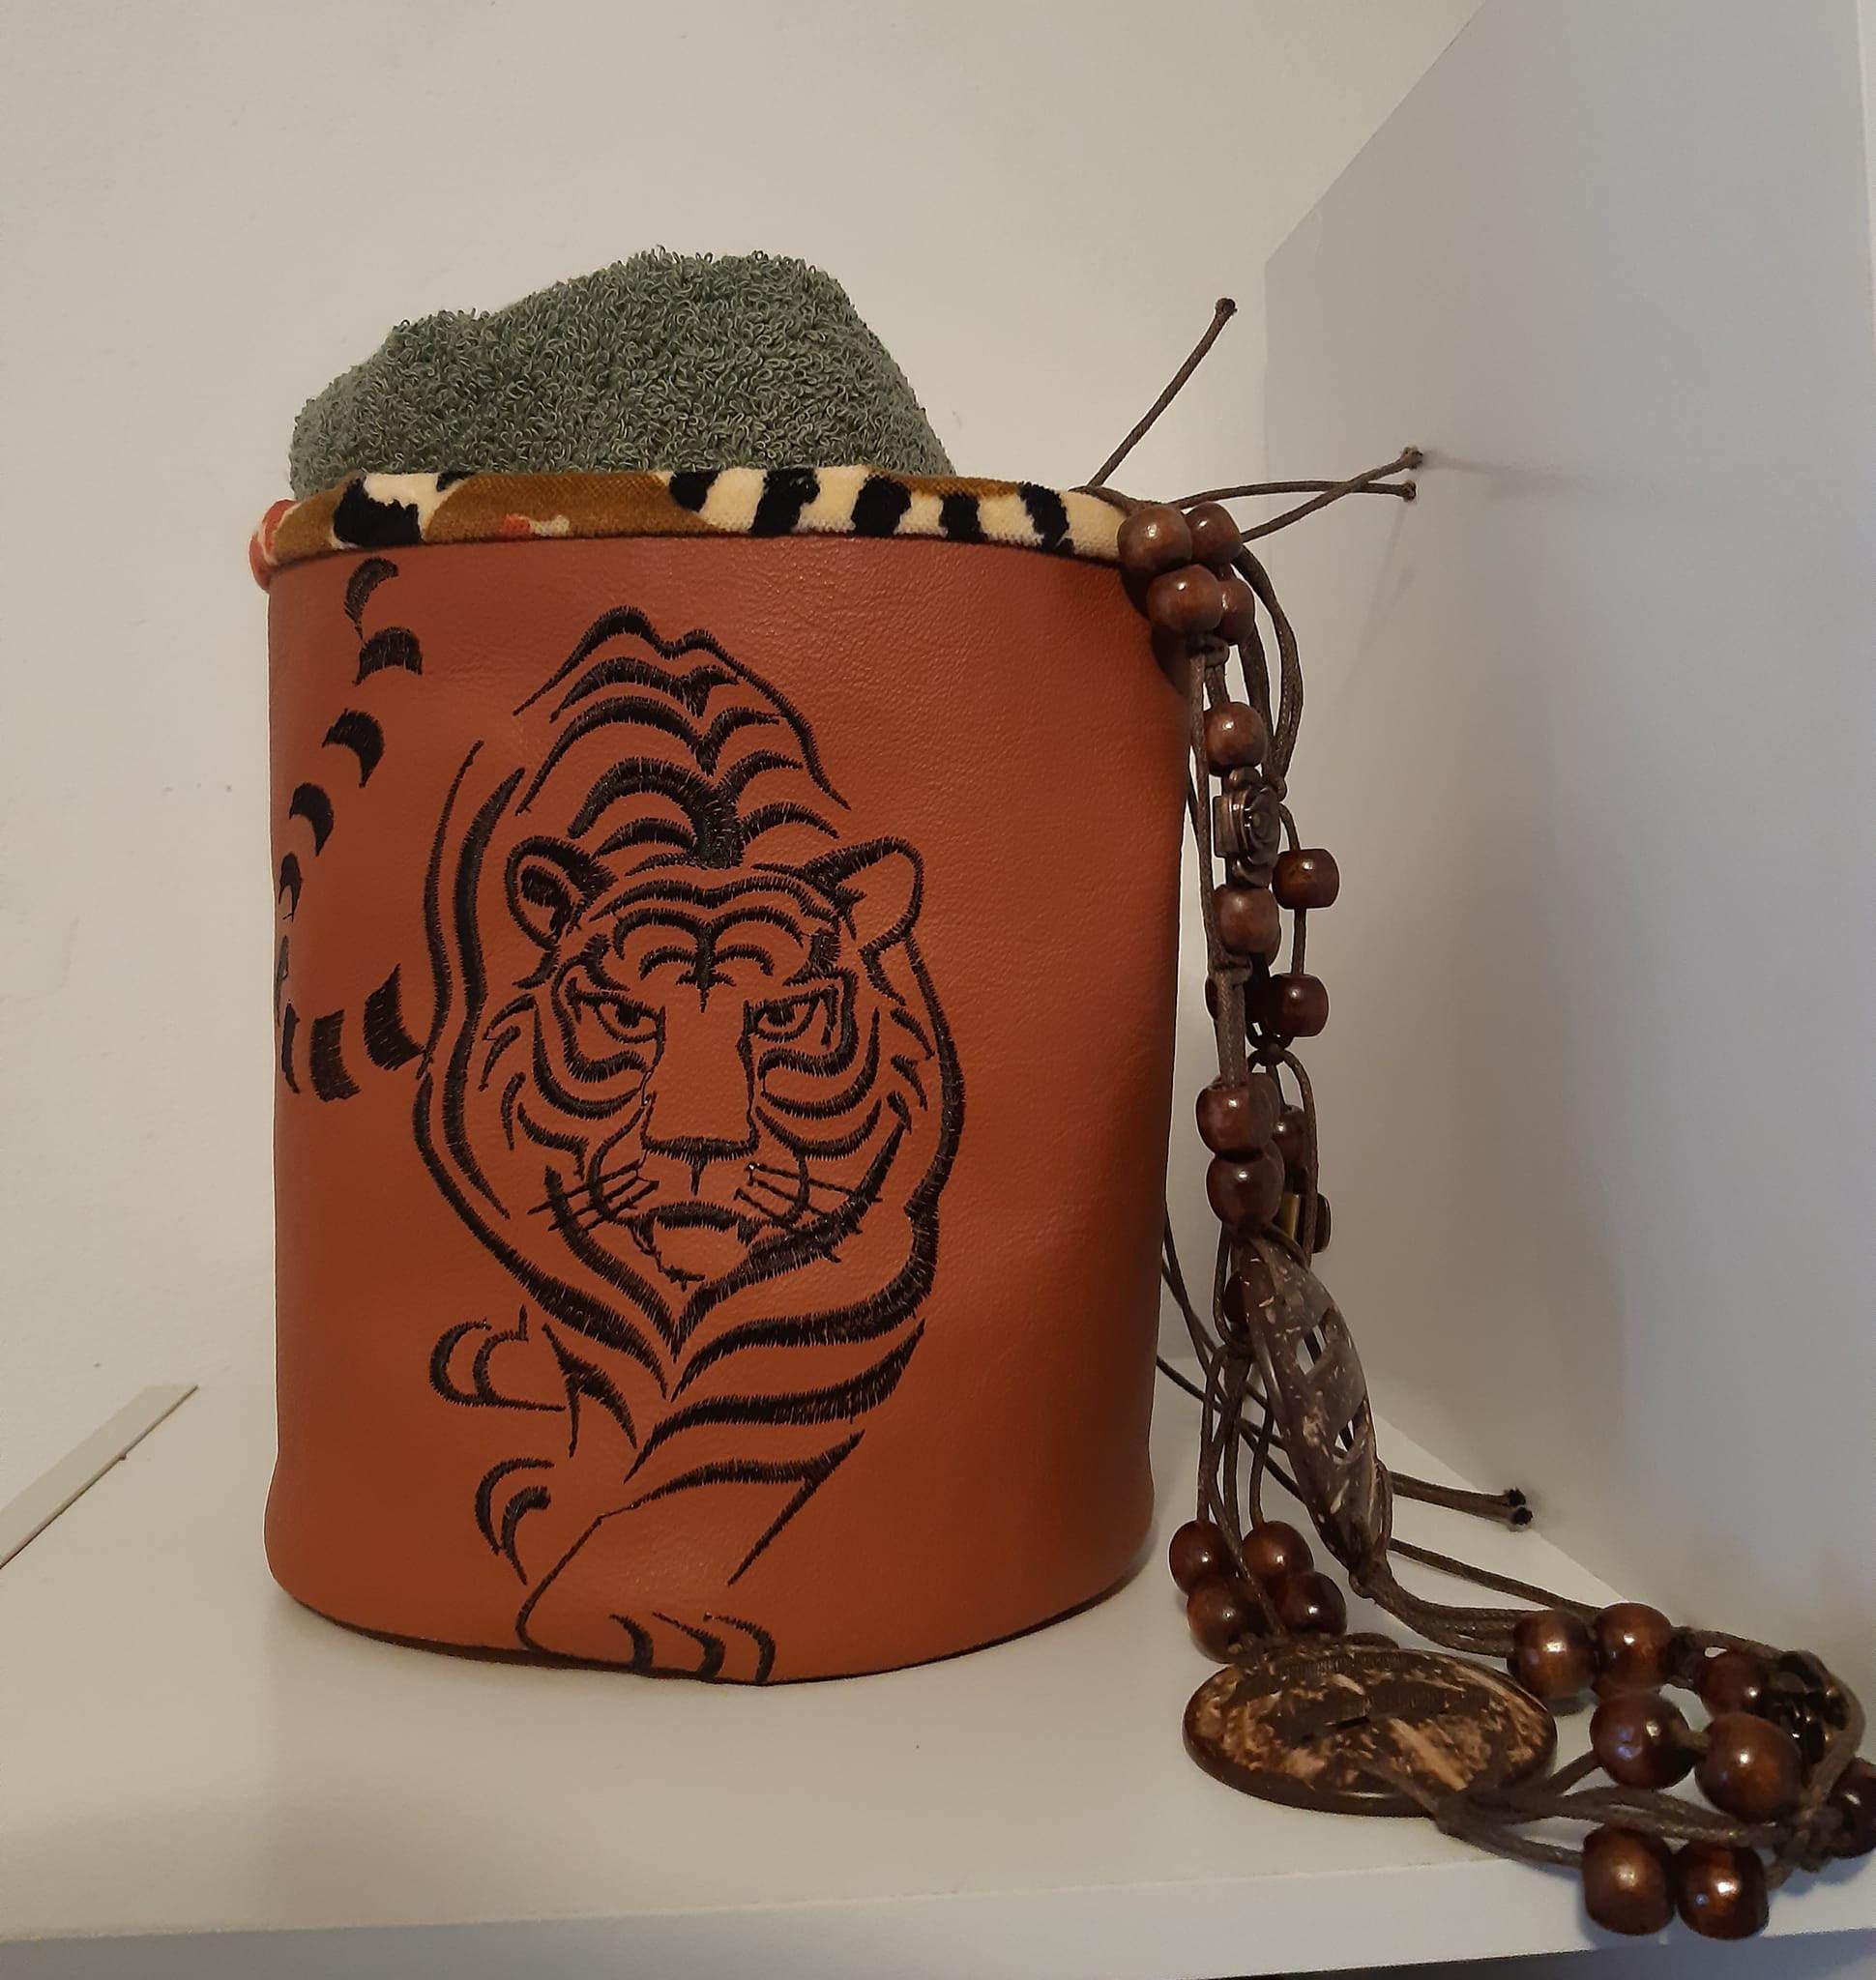 Exquisite Leather Basket with Majestic Walking Tiger Embroidery: A Luxurious and Functional Statement Piece